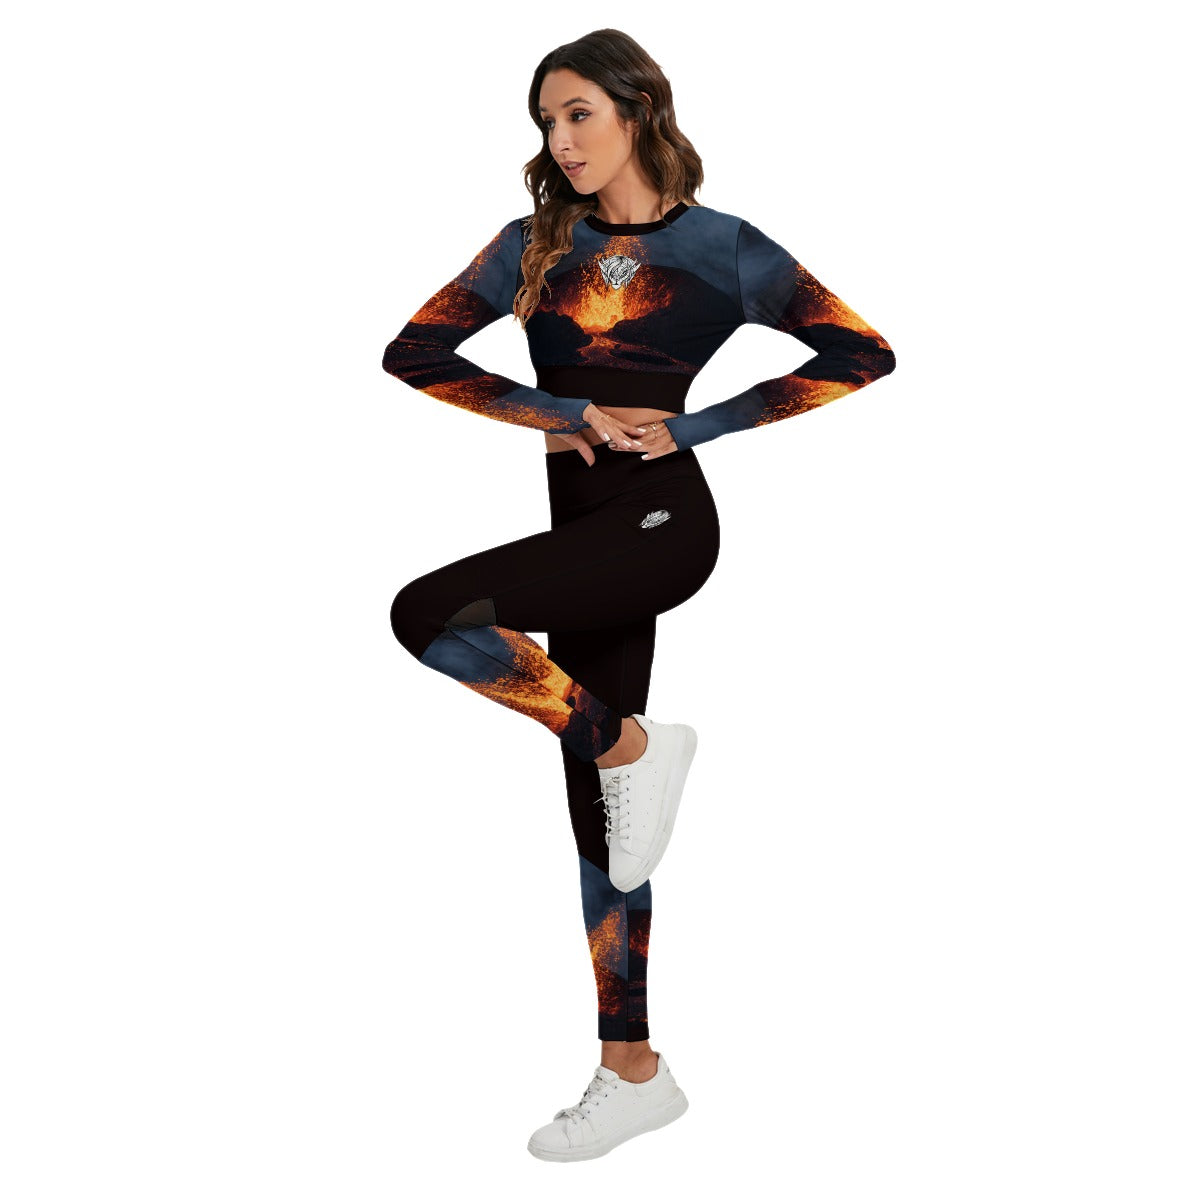 Fired up Ice Queen Women's Sport Set With Backless Top And Leggings